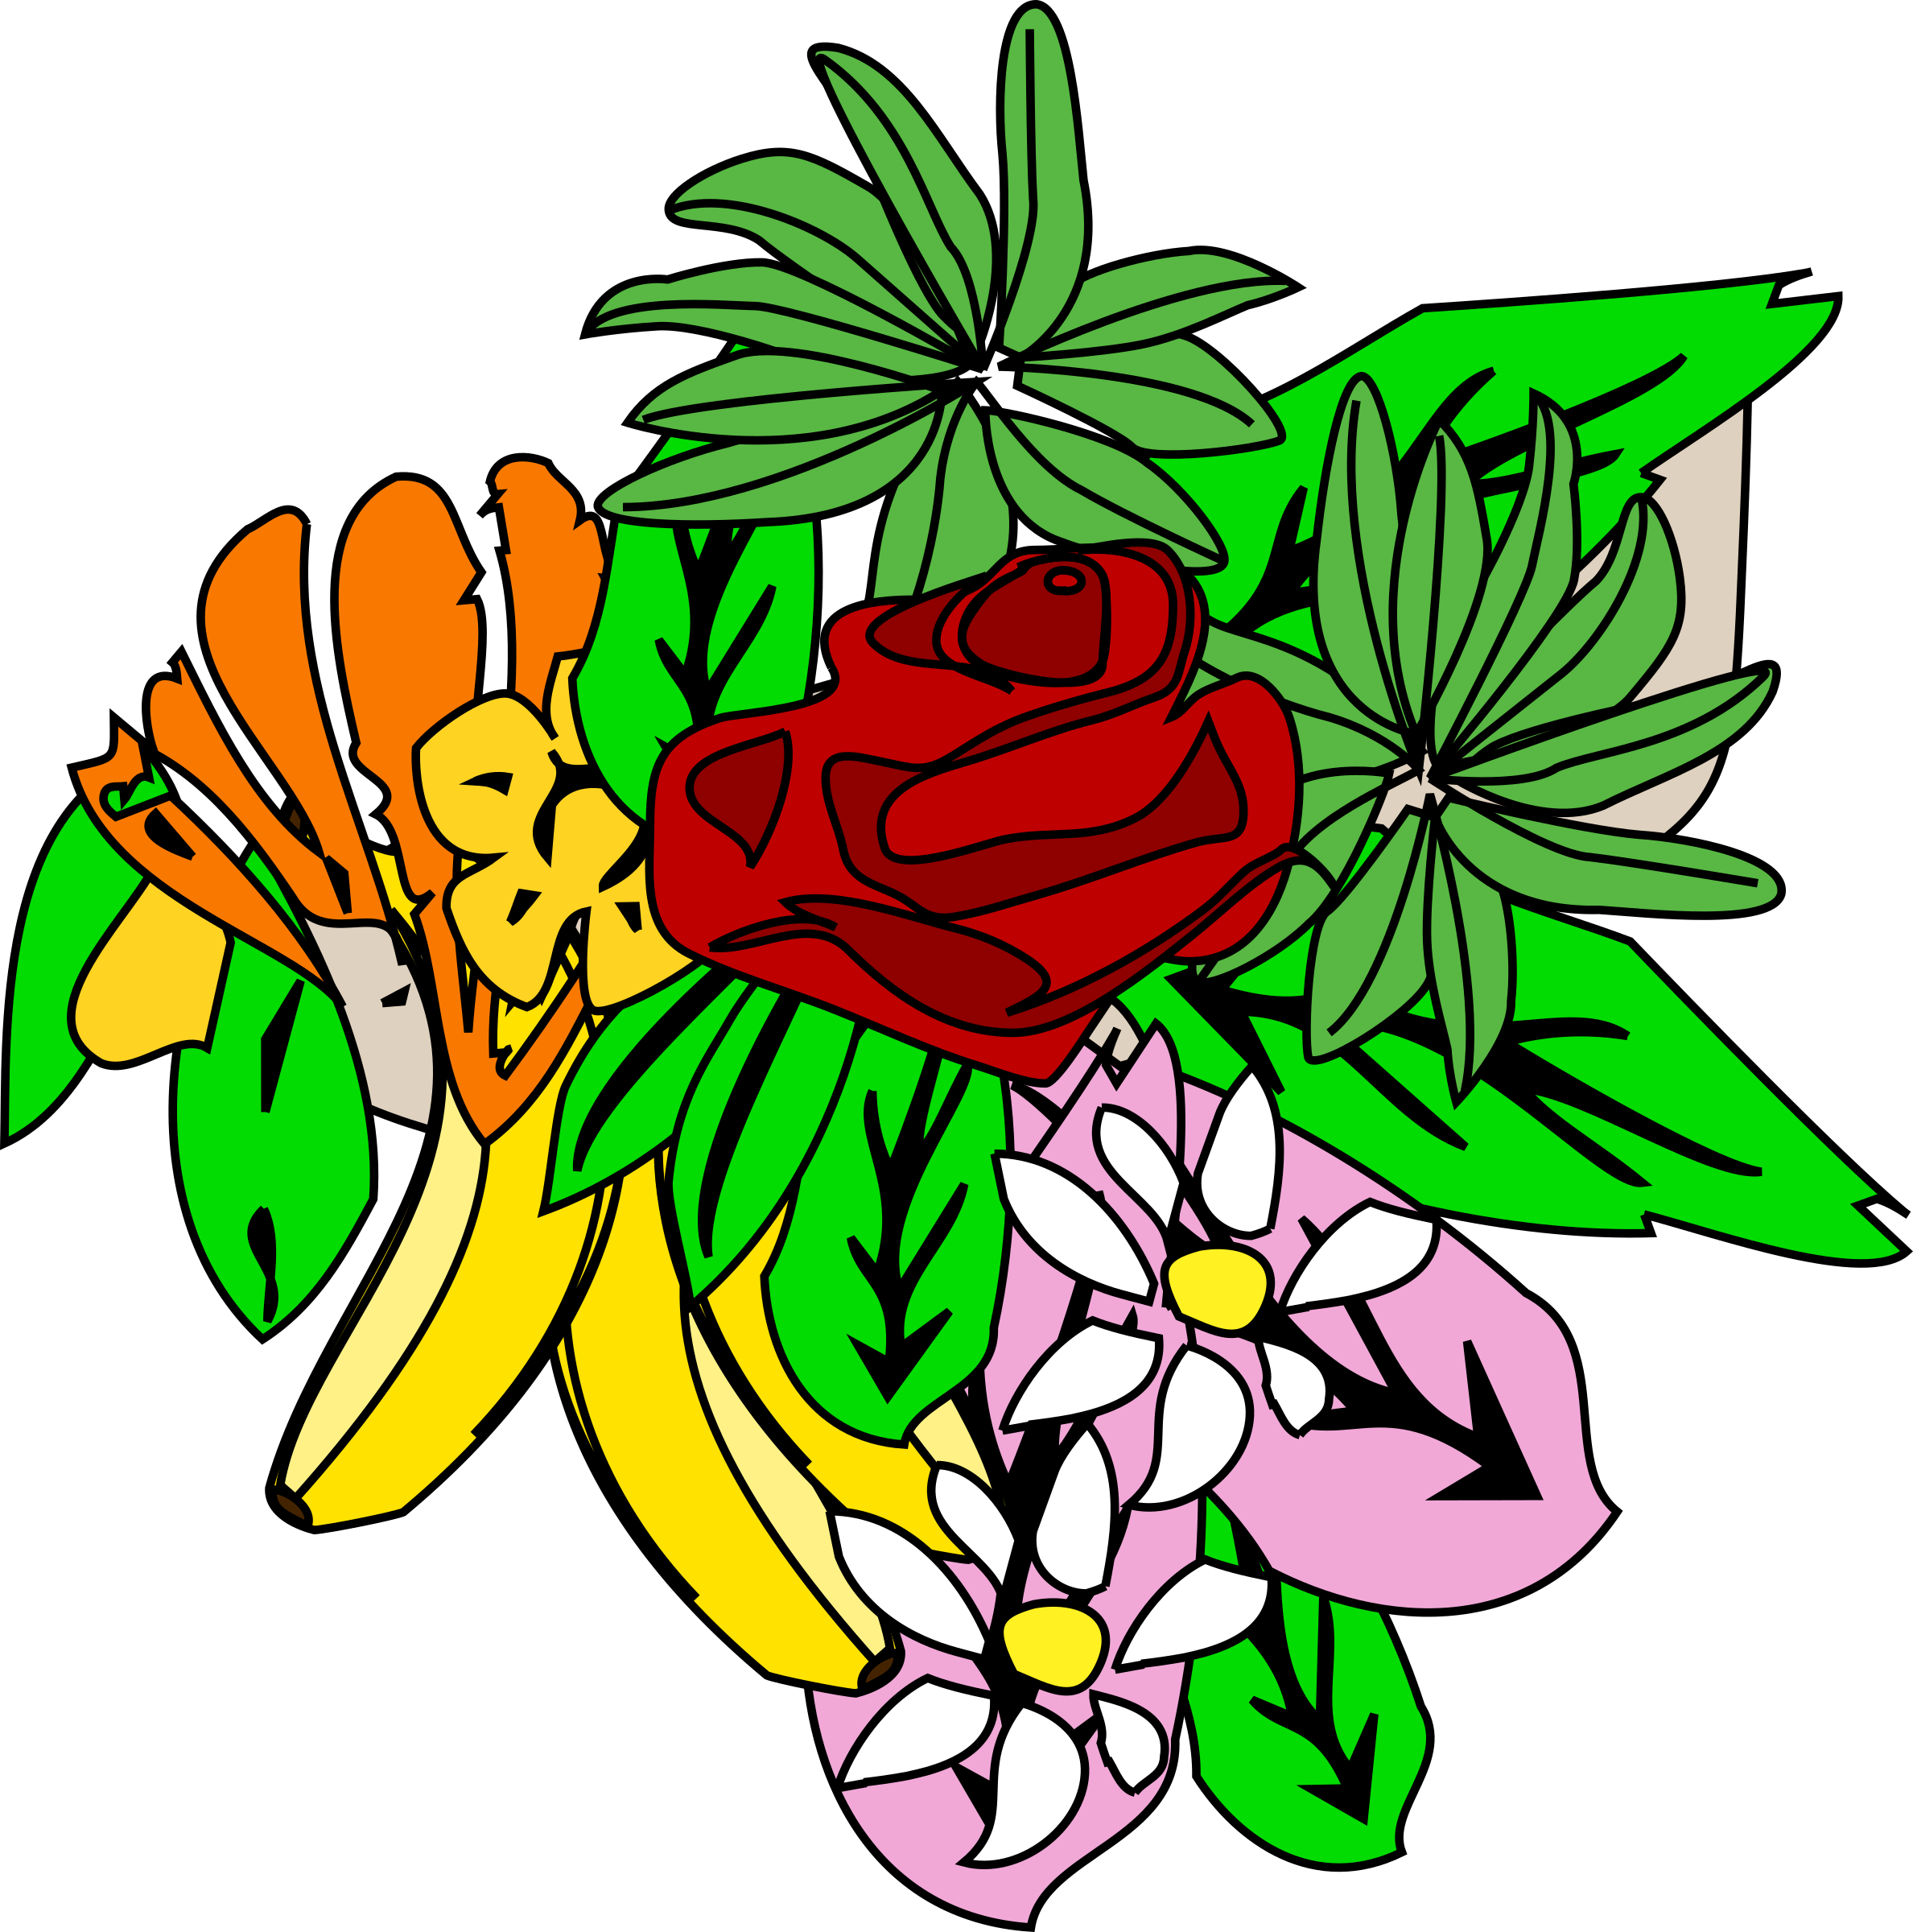 Food and flower design. Group clipart bunch